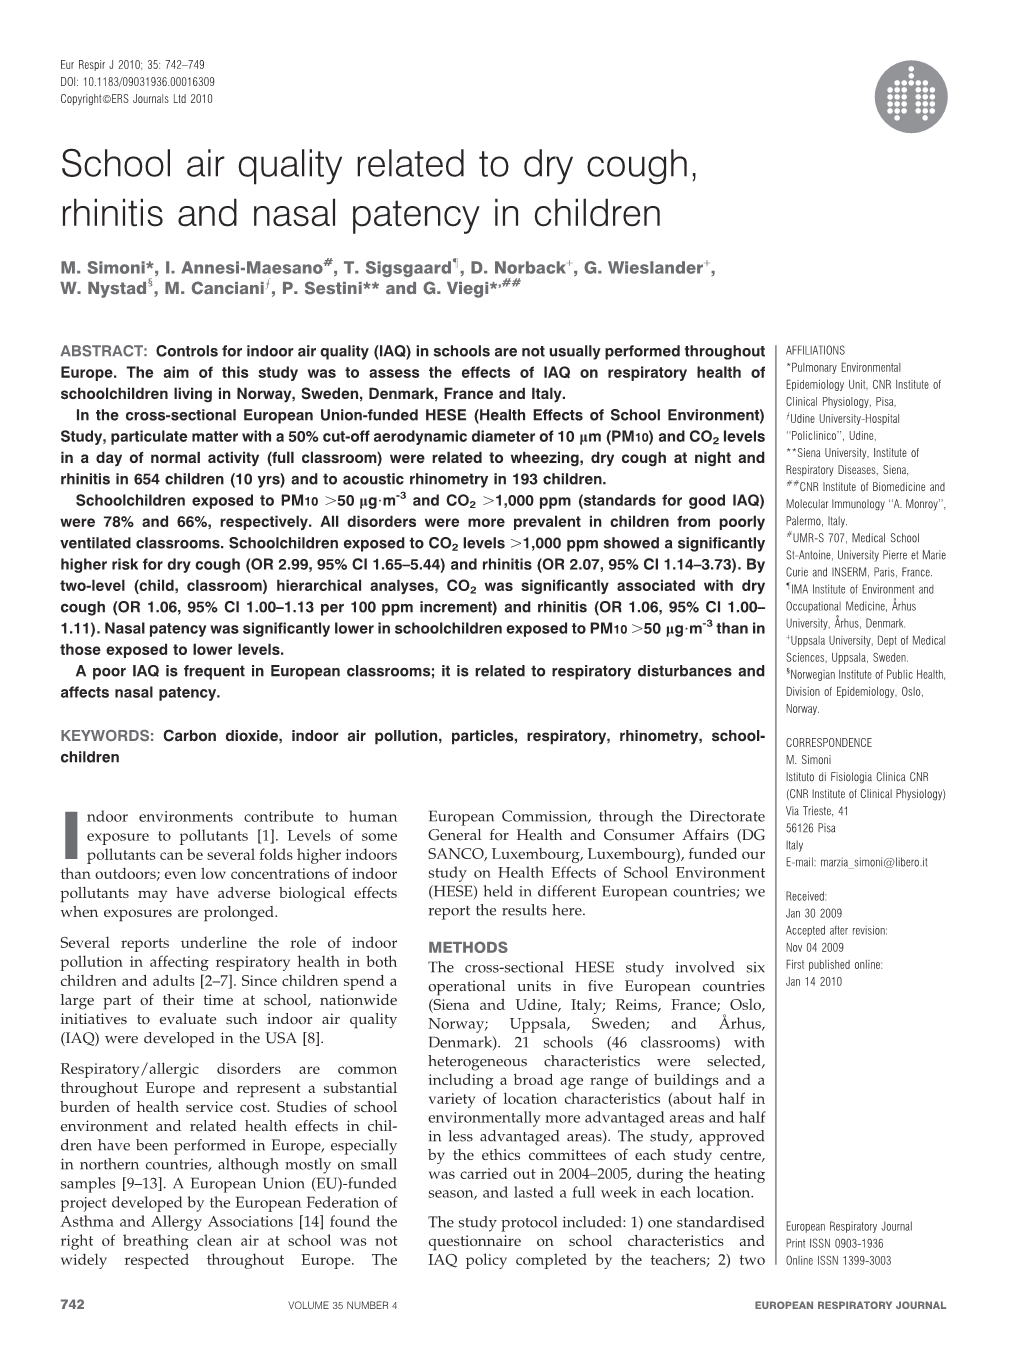 School Air Quality Related to Dry Cough, Rhinitis and Nasal Patency in Children